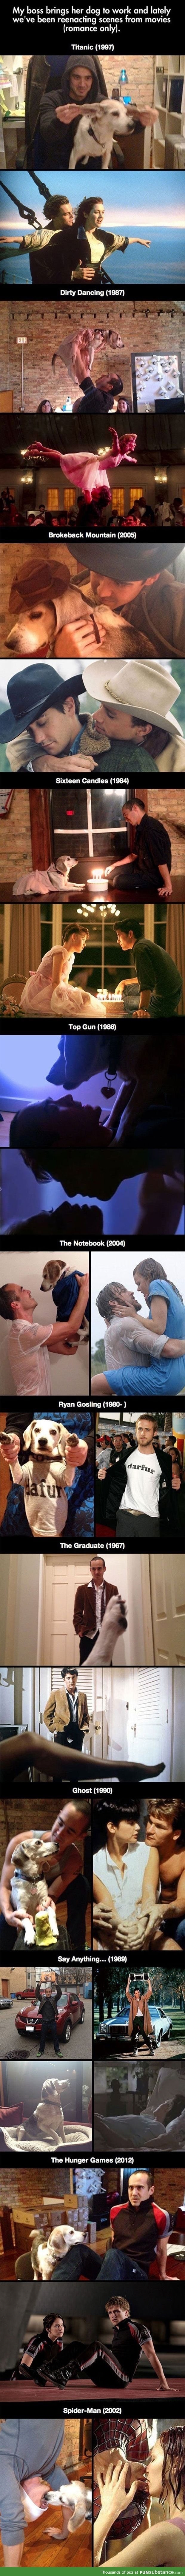 Re-enacting movies with a dog